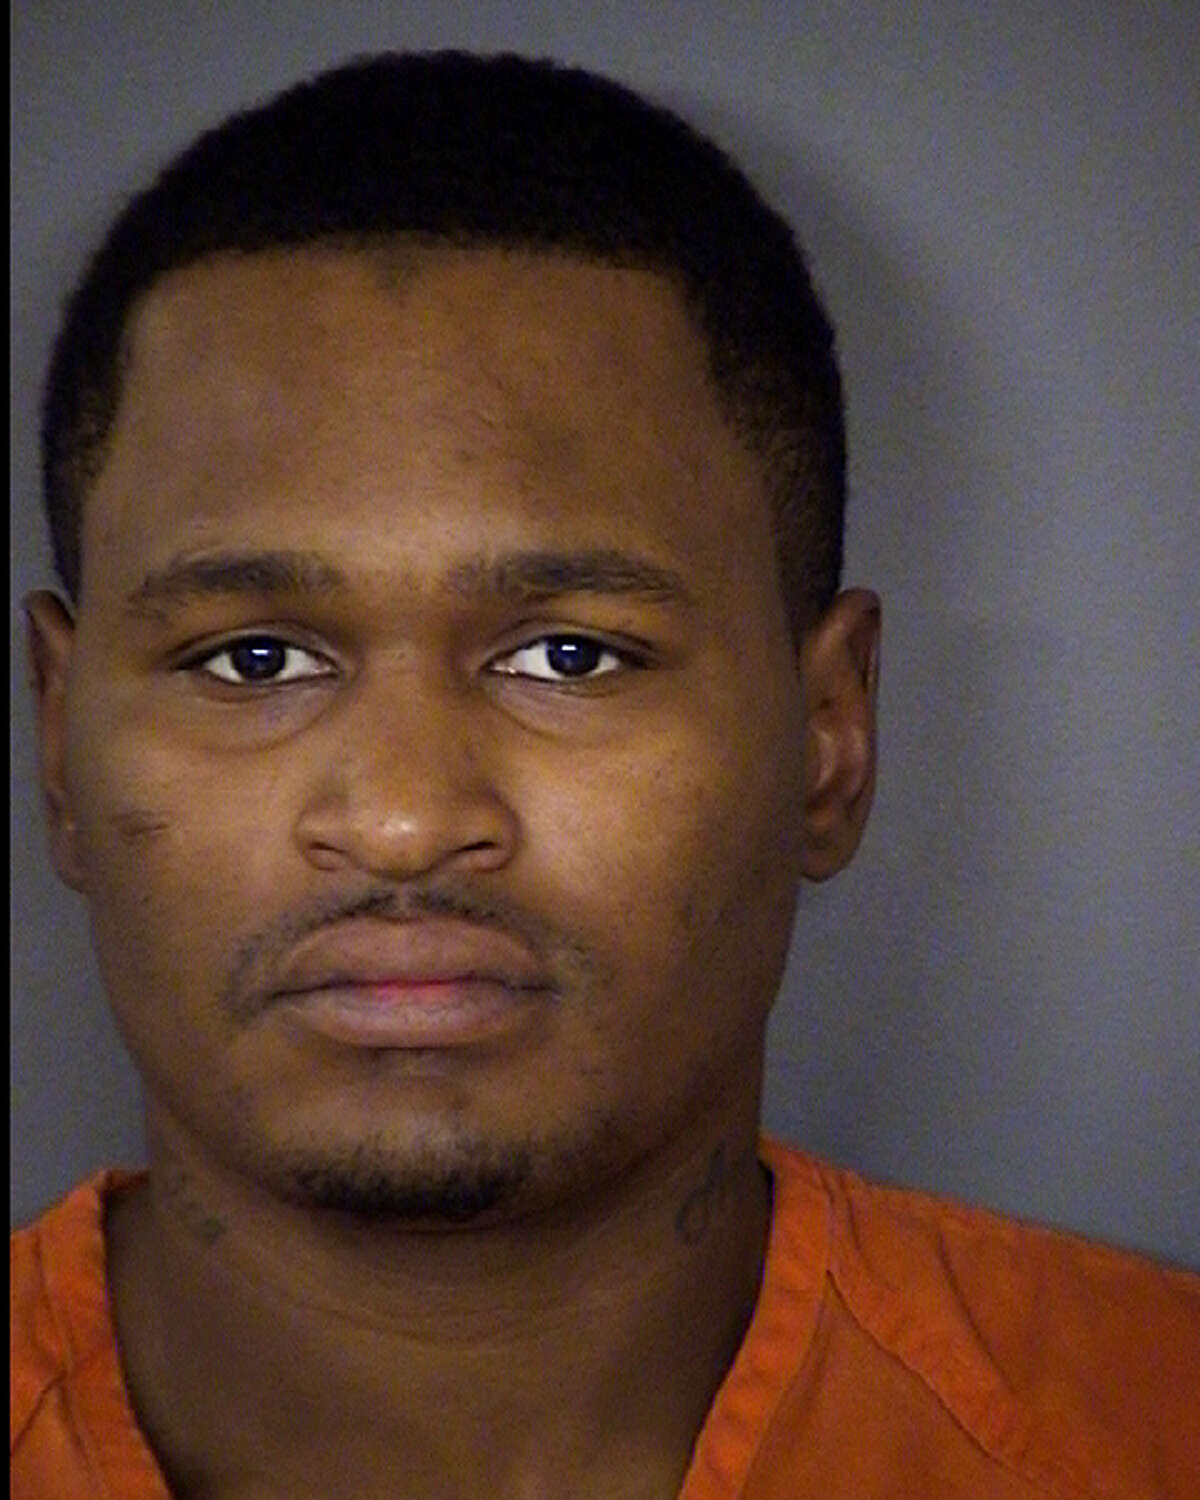 The suspect, Kedreen Marque Pugh, now faces a charge of murder in the death of Brianna De La Cruz. He remains in the Bexar County Jail early Wednesday, and he faces additional charges of felony possession of a firearm and two counts of possession of a controlled substance with intent to deliver.